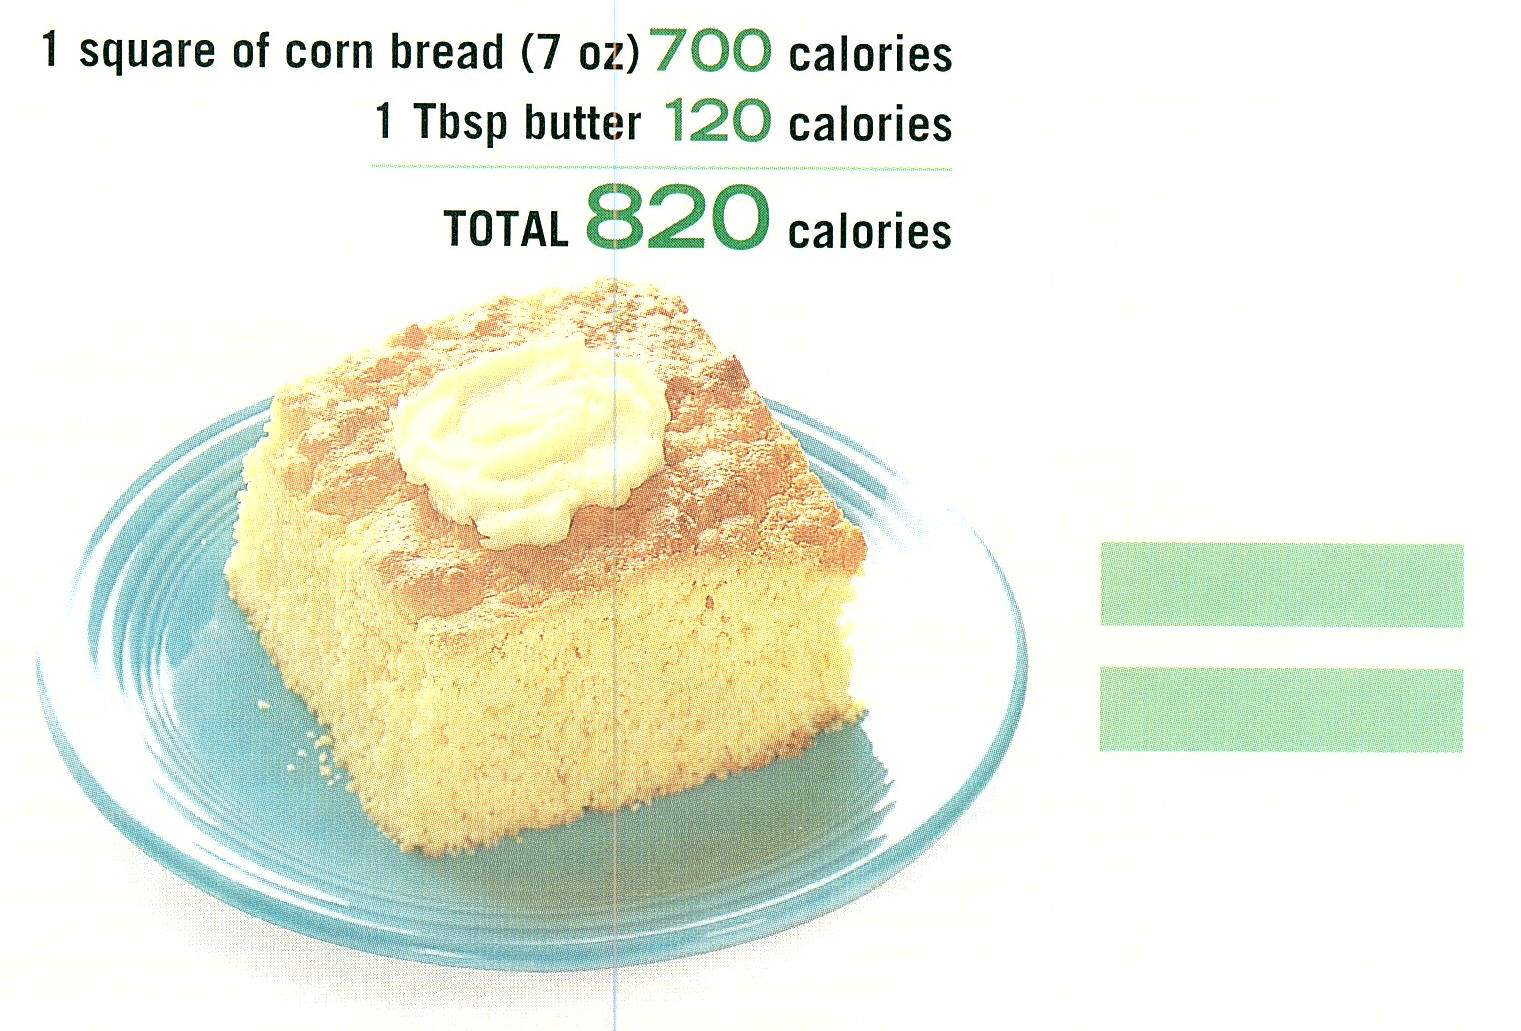 Starch | See the Calorie Difference